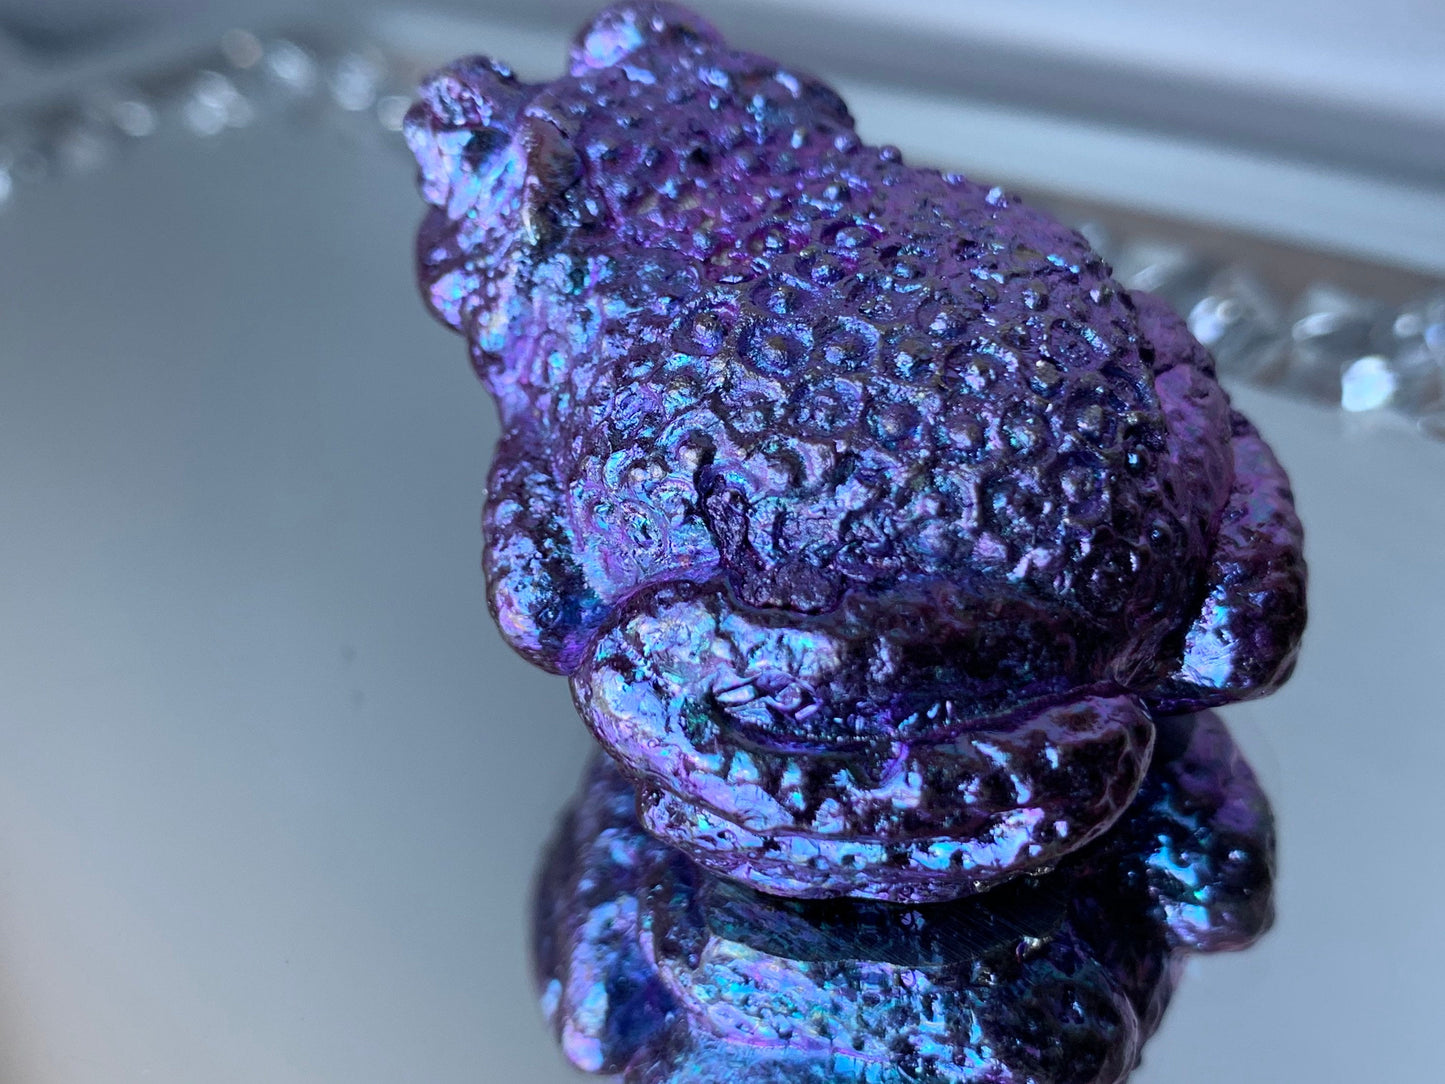 Purple Blue Bismuth Crystal Small Toad Metal Art Sculpture